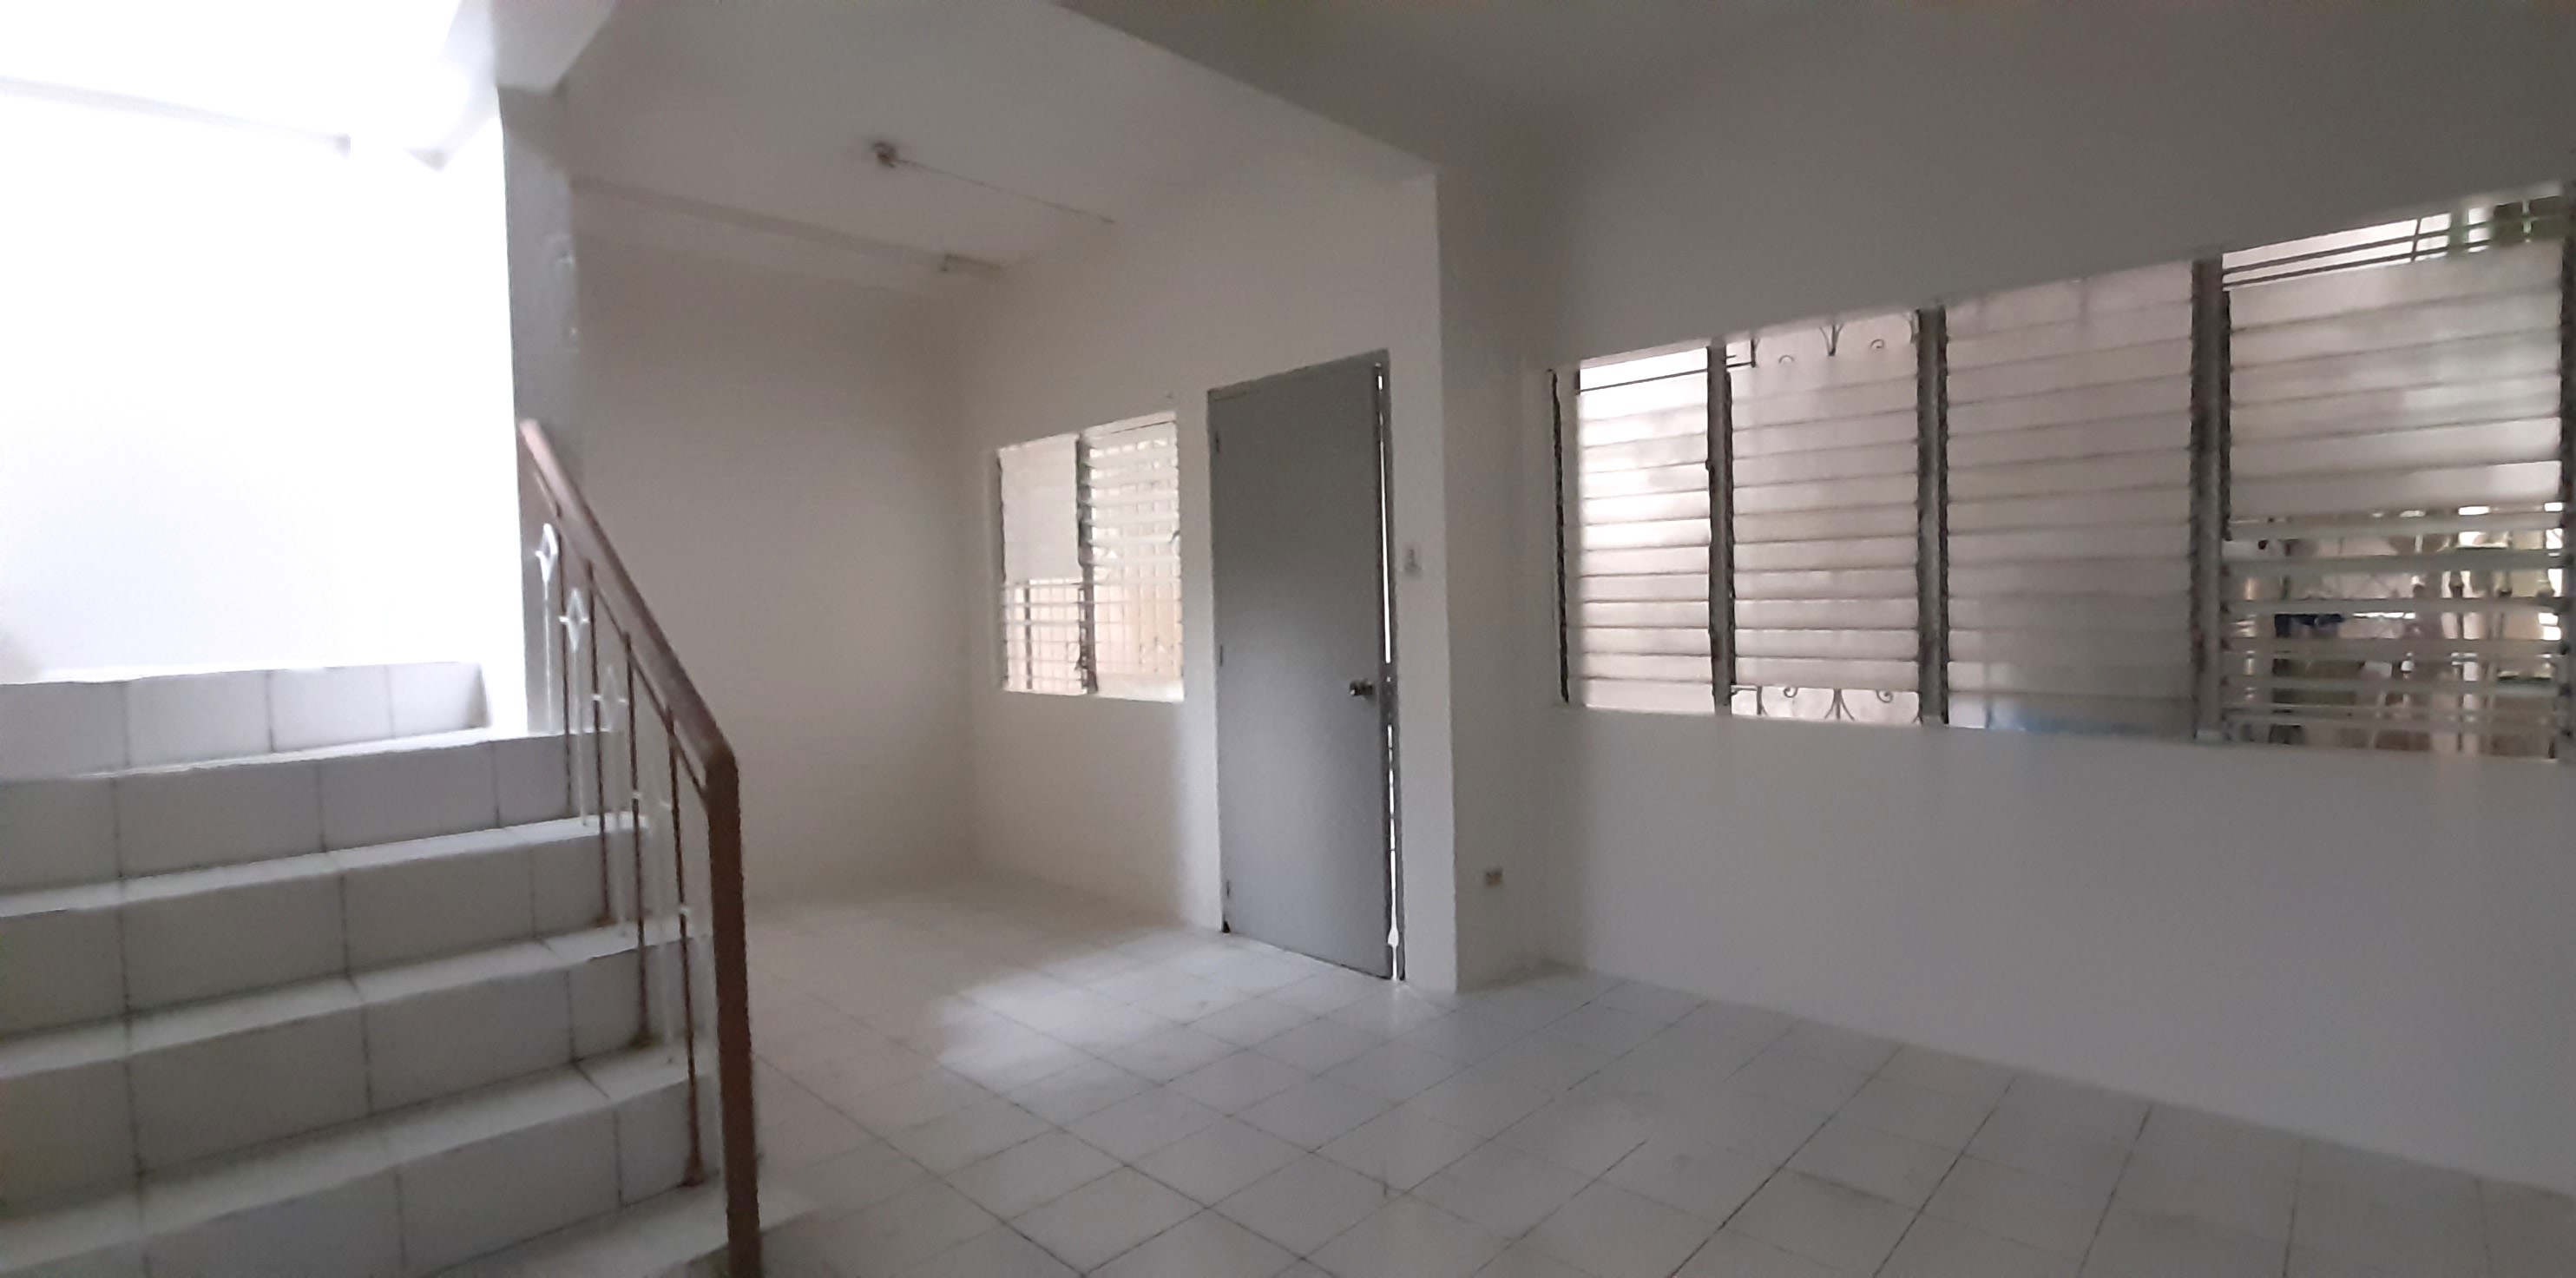 3-bedroom-apartment-in-capitol-cebu-city-and-unfurnished